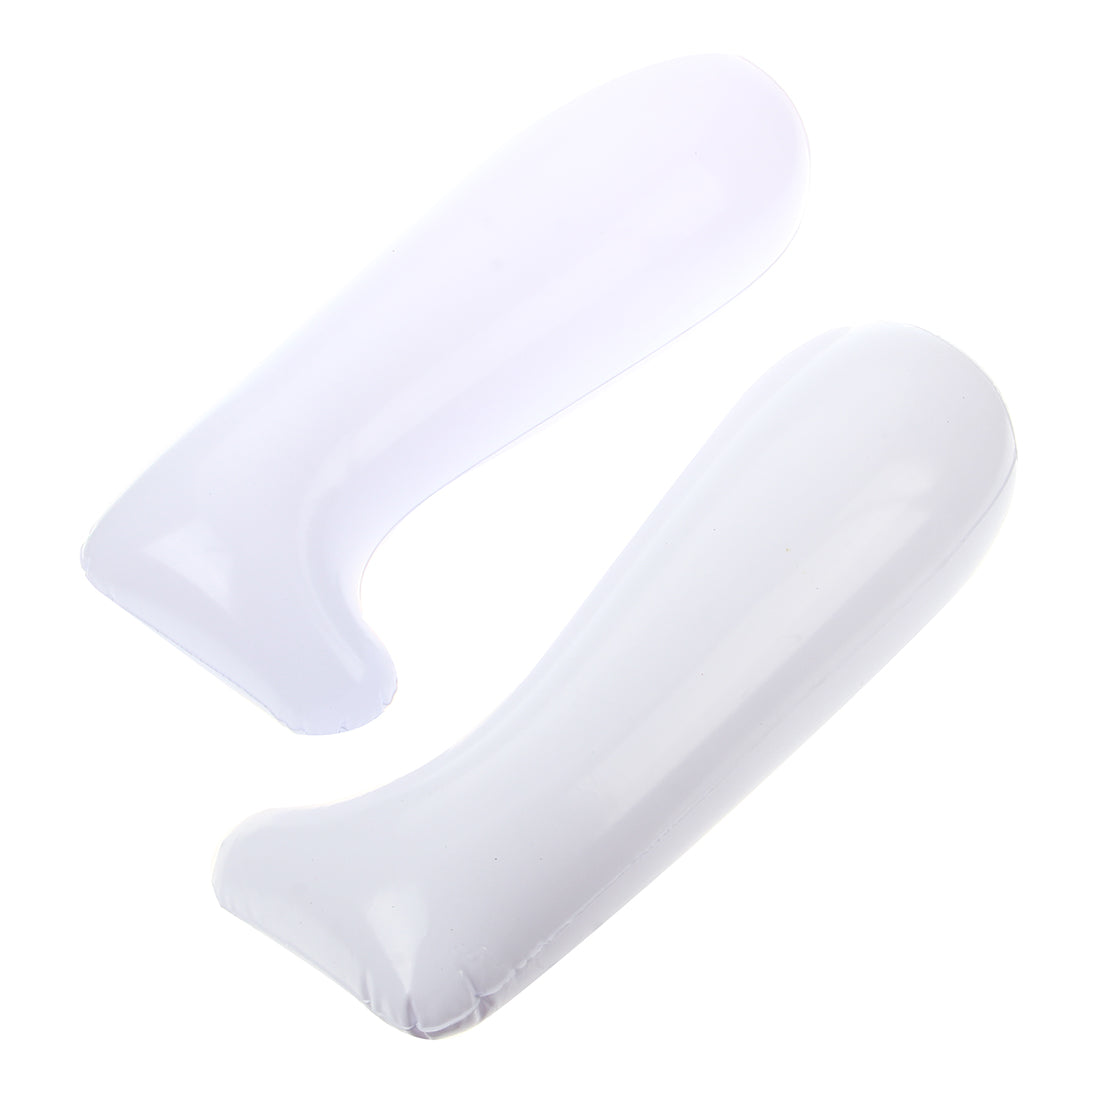 Hot-5 pairs 12-inch boot film inflatable stretchers milling shoe trees - White - ebowsos